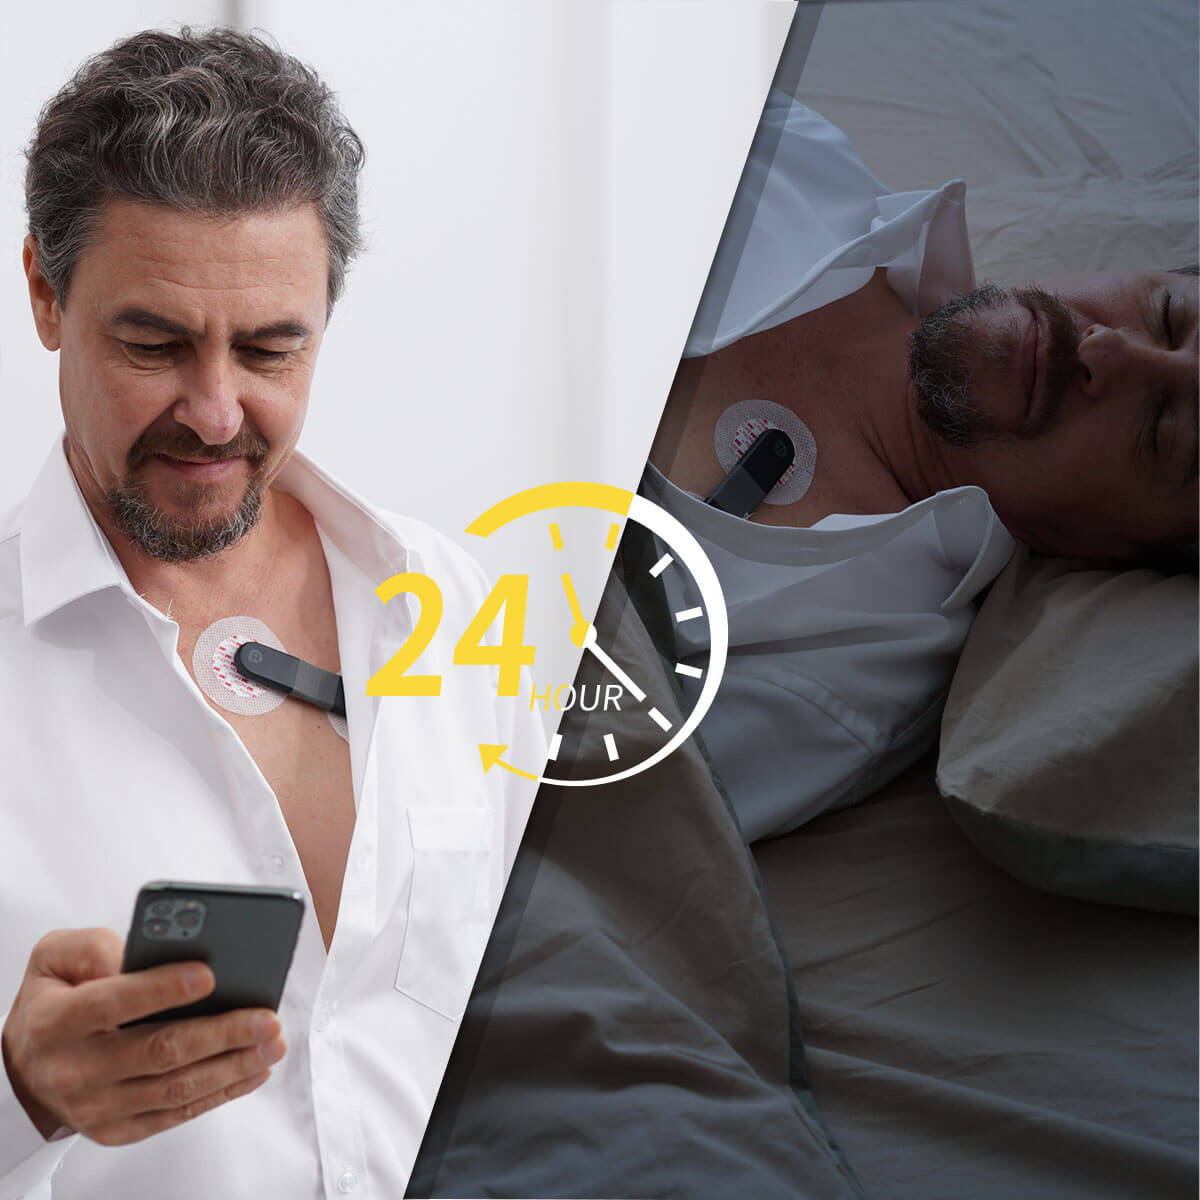 24-hour ecg monitor, 24-hour holter monitor, 24-hour heart health monitor